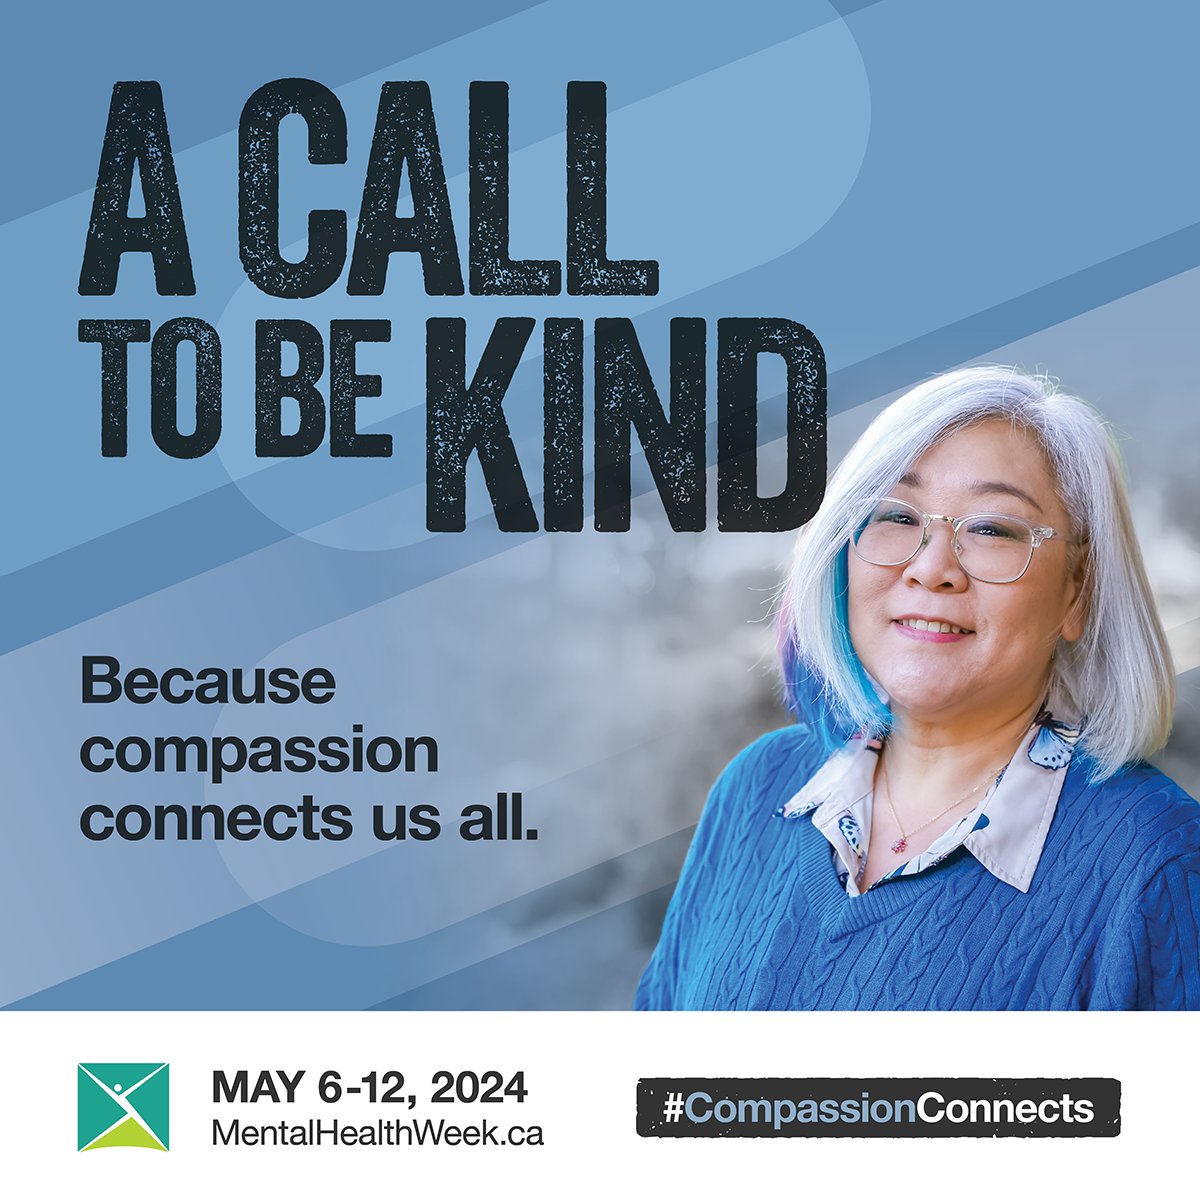 Life is full of ups and downs. By recognizing this shared experience, we start to feel how #CompassionConnects. Learn more and get involved during #MentalHealthWeek at mentalhealthweek.ca.